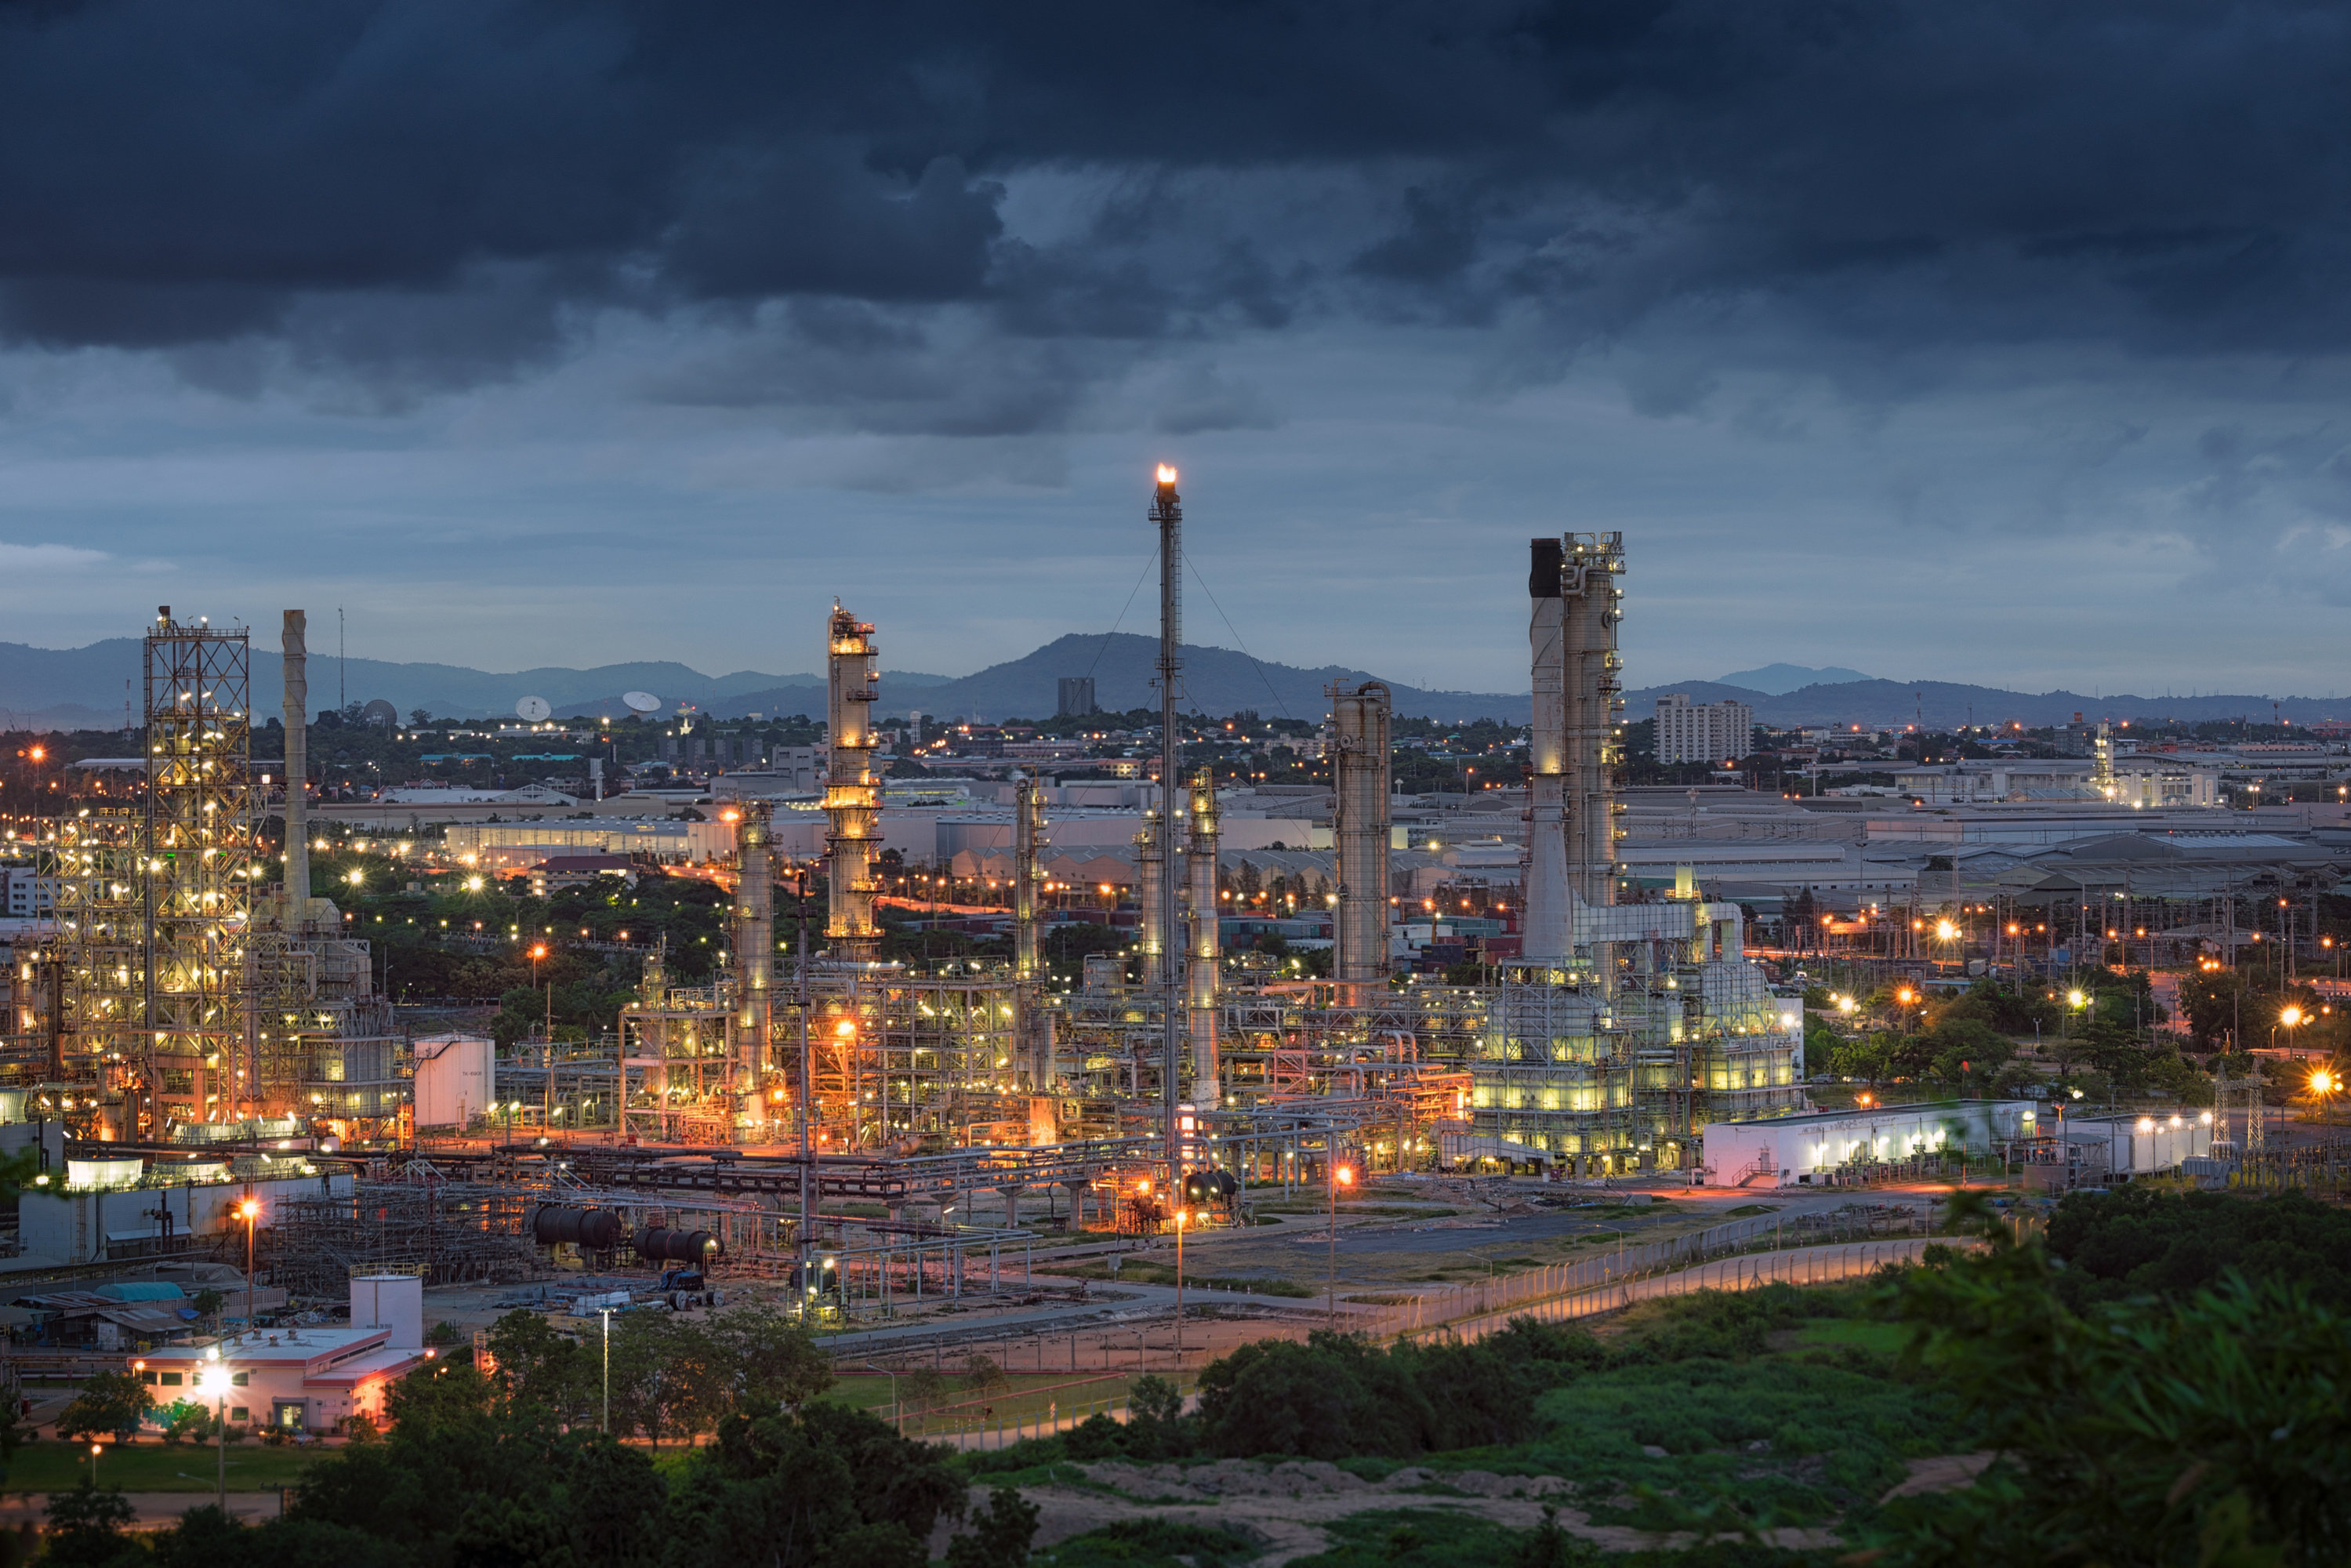 An oil refinery at night